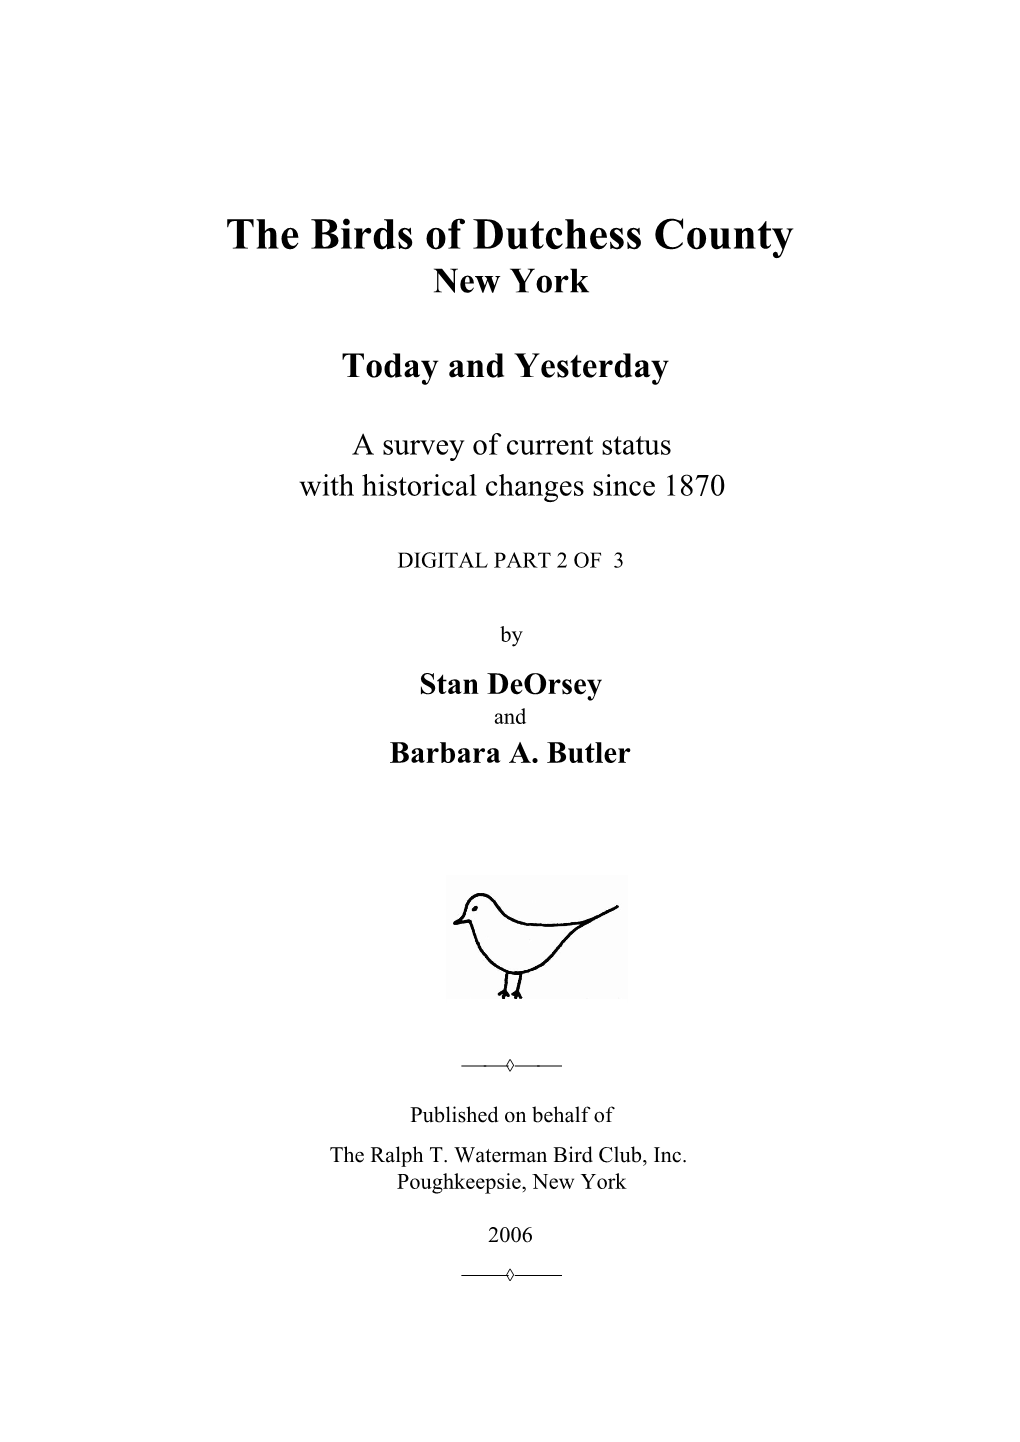 Birds Lost and Gained in Dutchess County